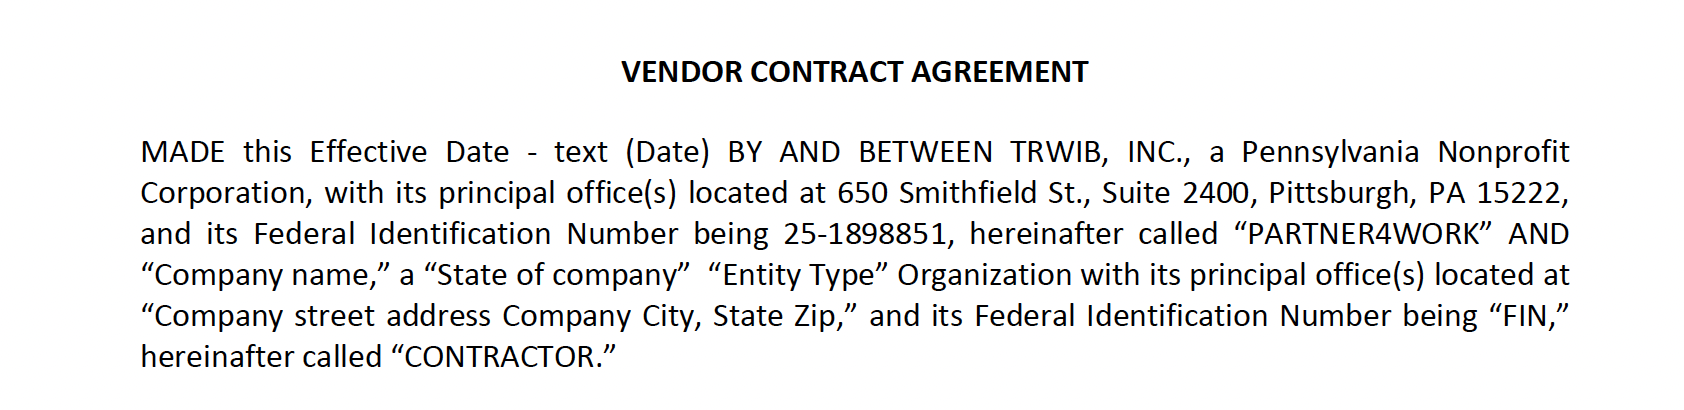 sample_vendor_contract.png